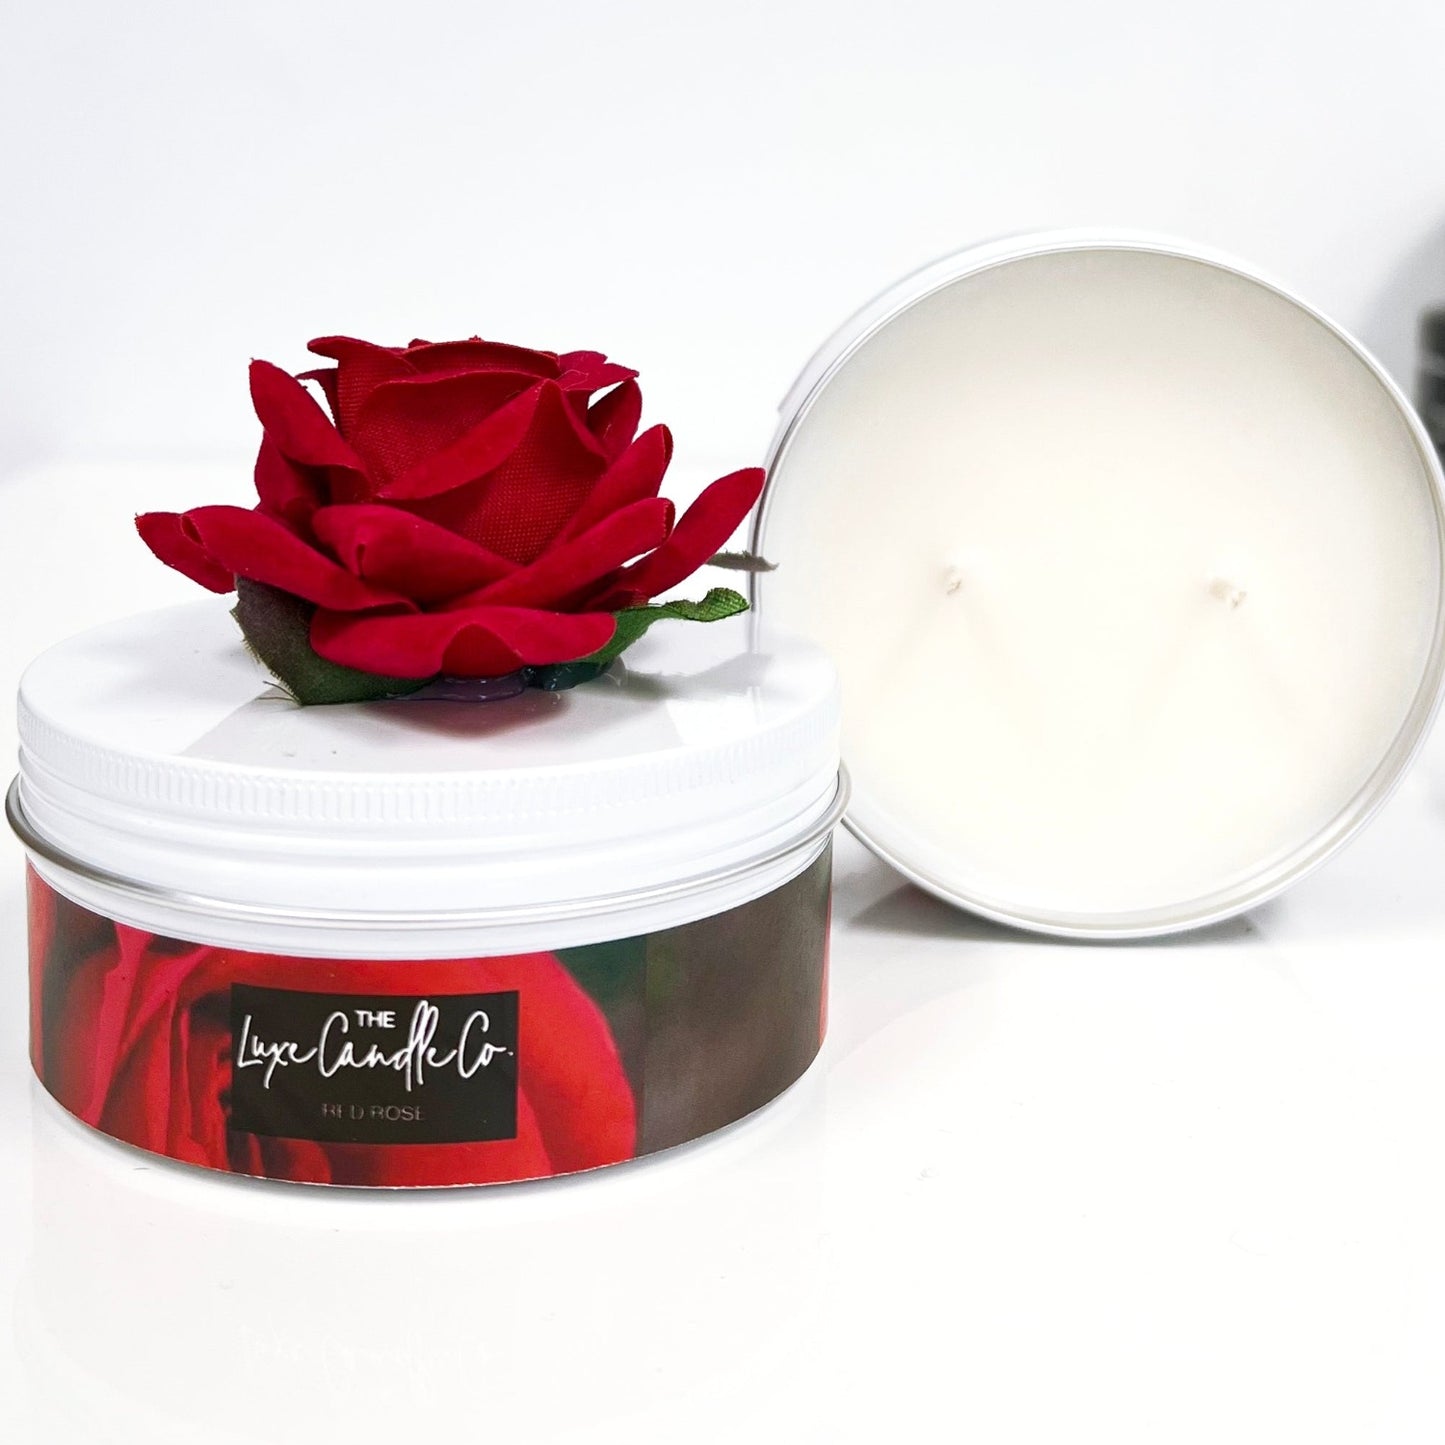 Valentines Candle handmade with red velvet rose scented with rose